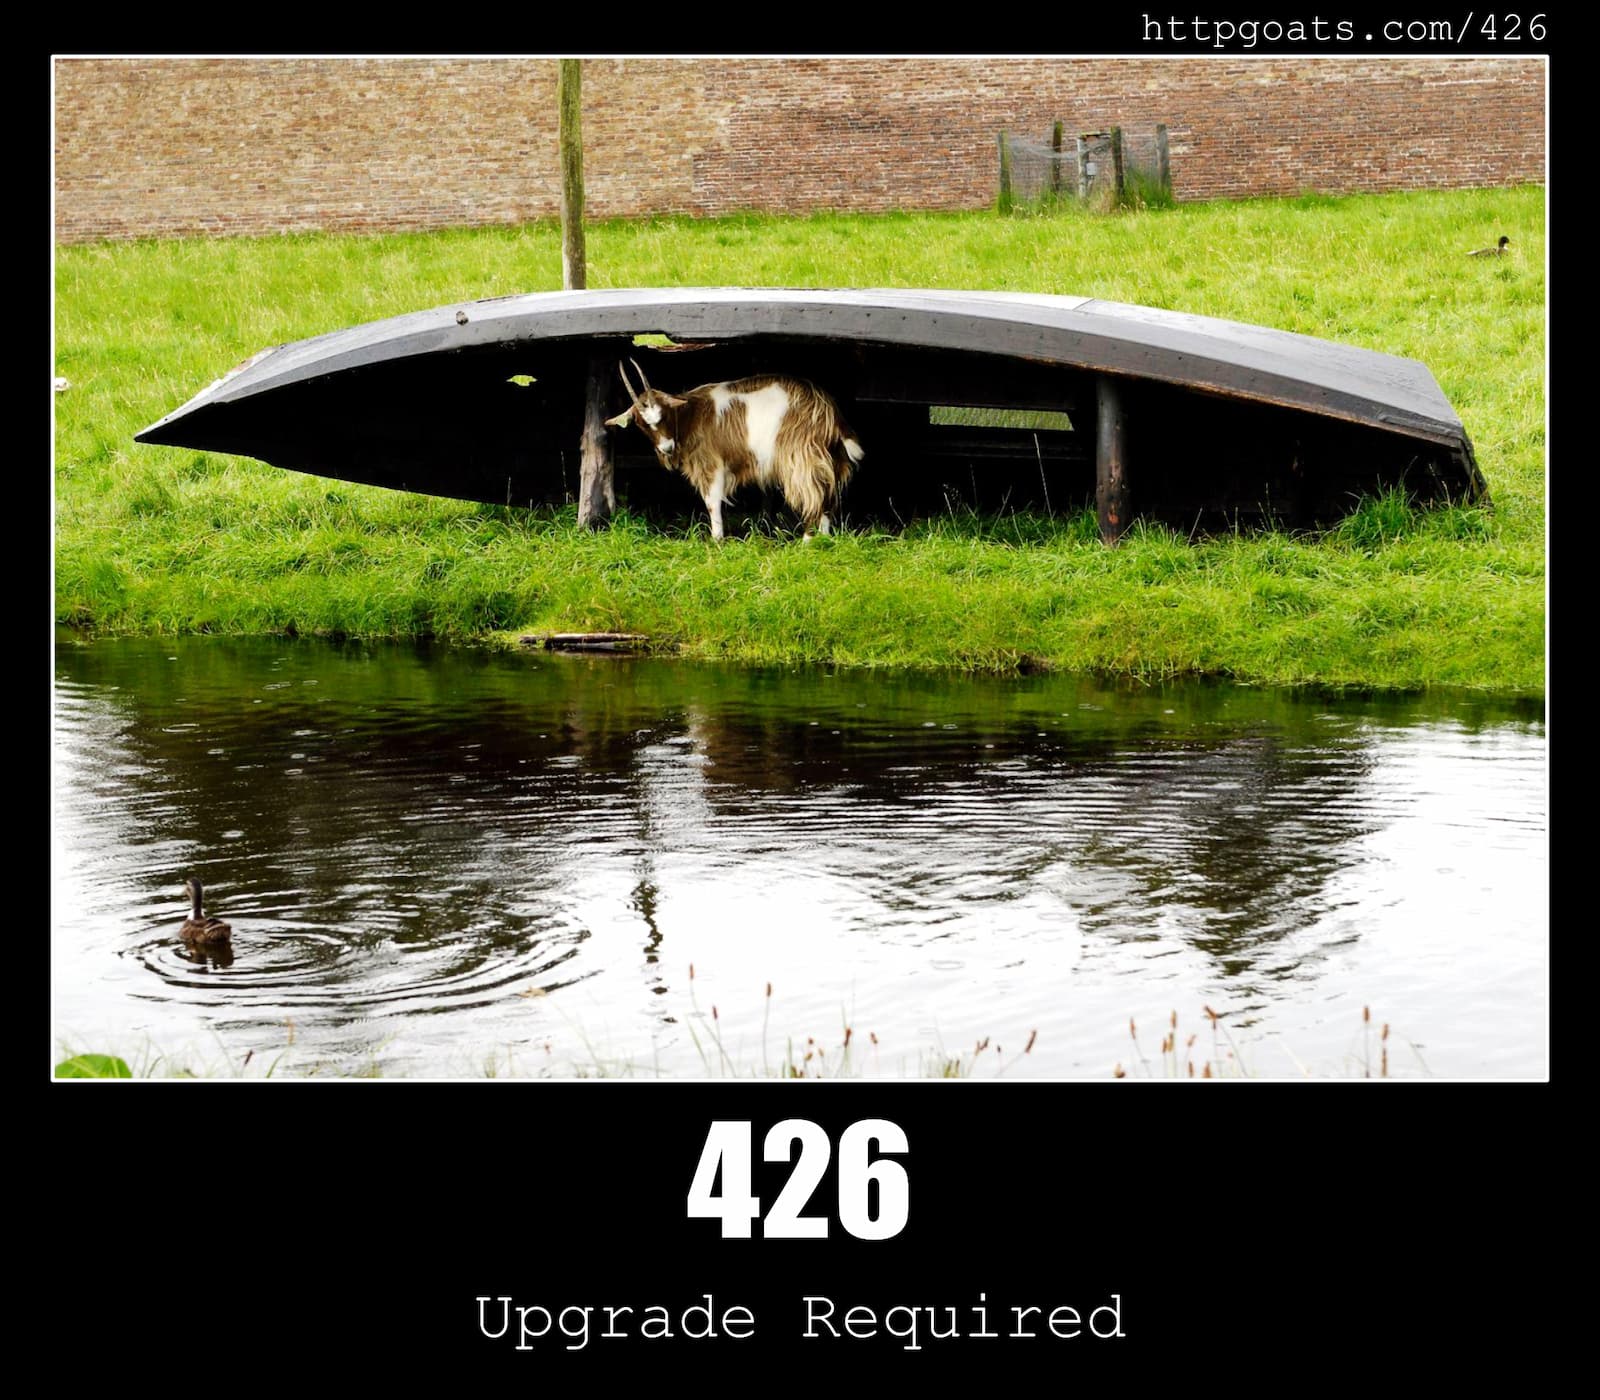 HTTP Status Code 426 Upgrade Required & Goats